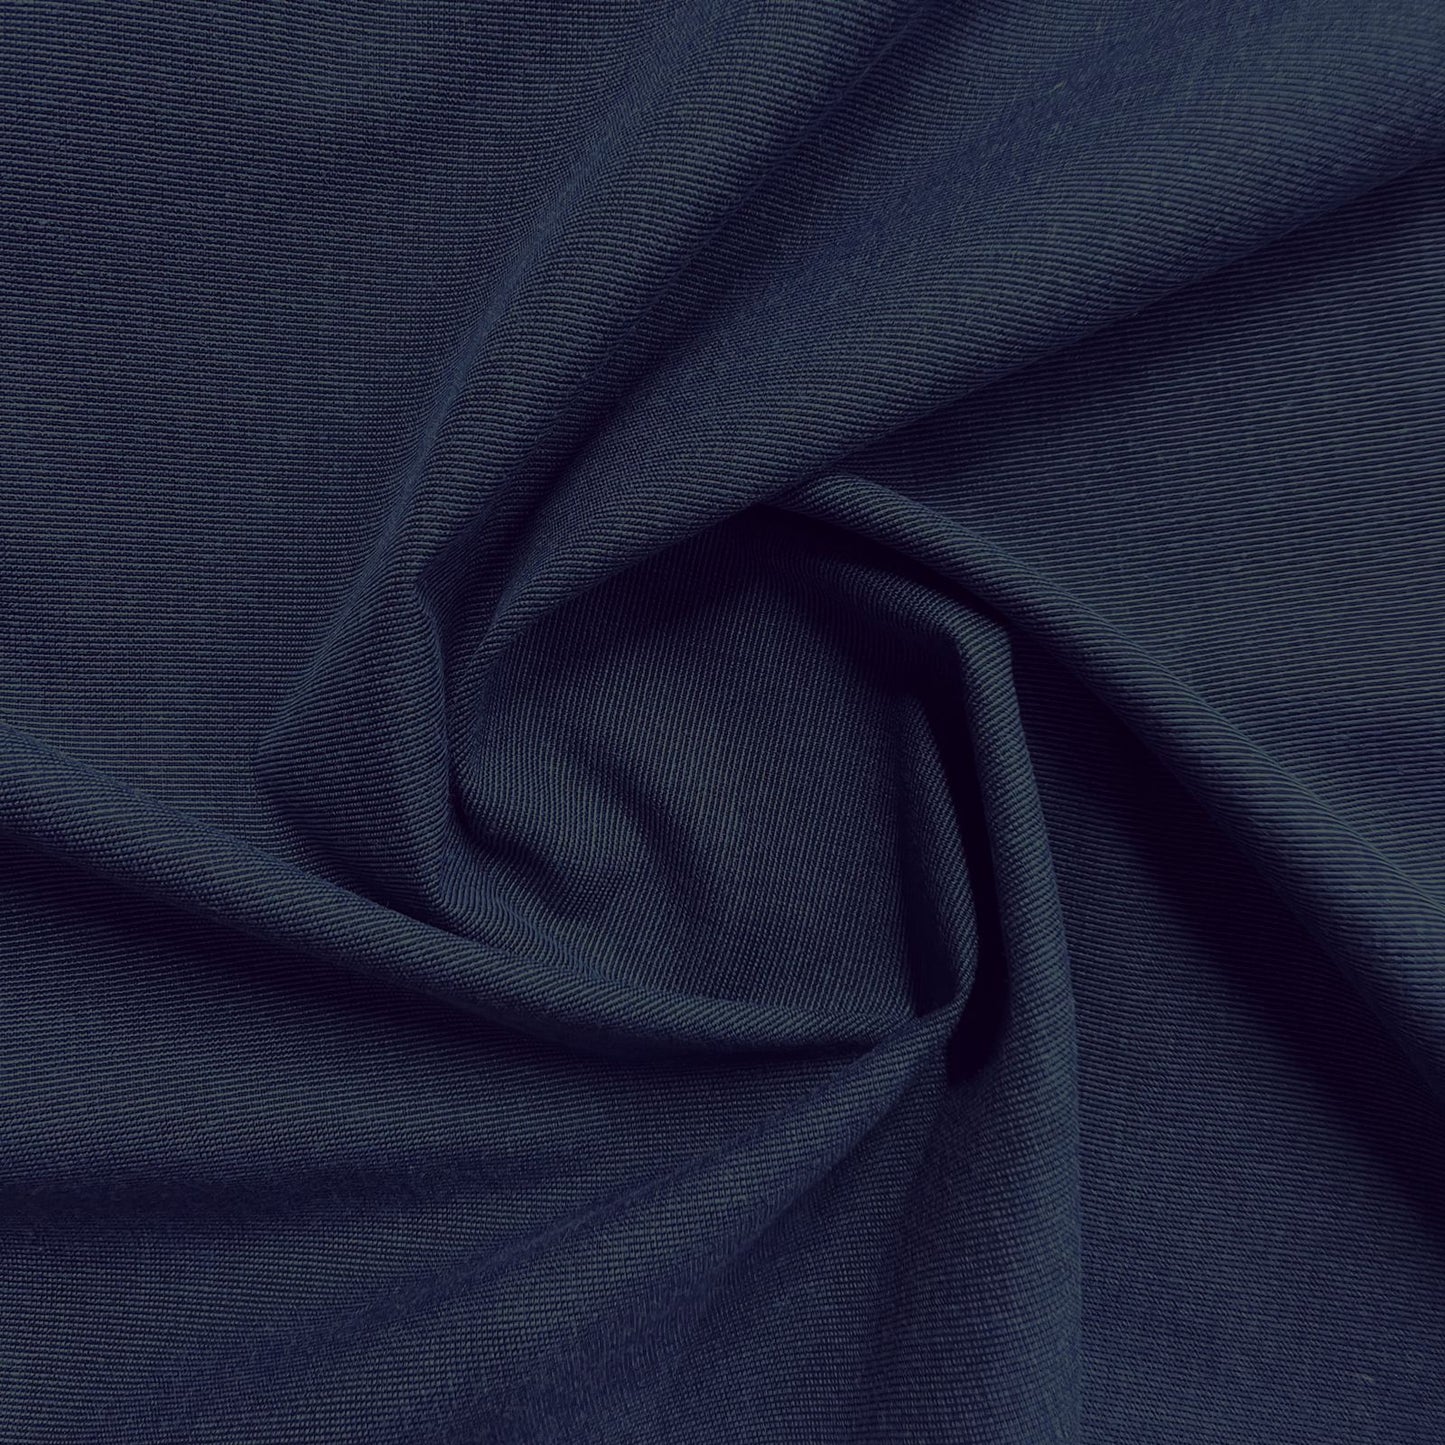 Grey Solid Poly Viscose Suiting Fabric